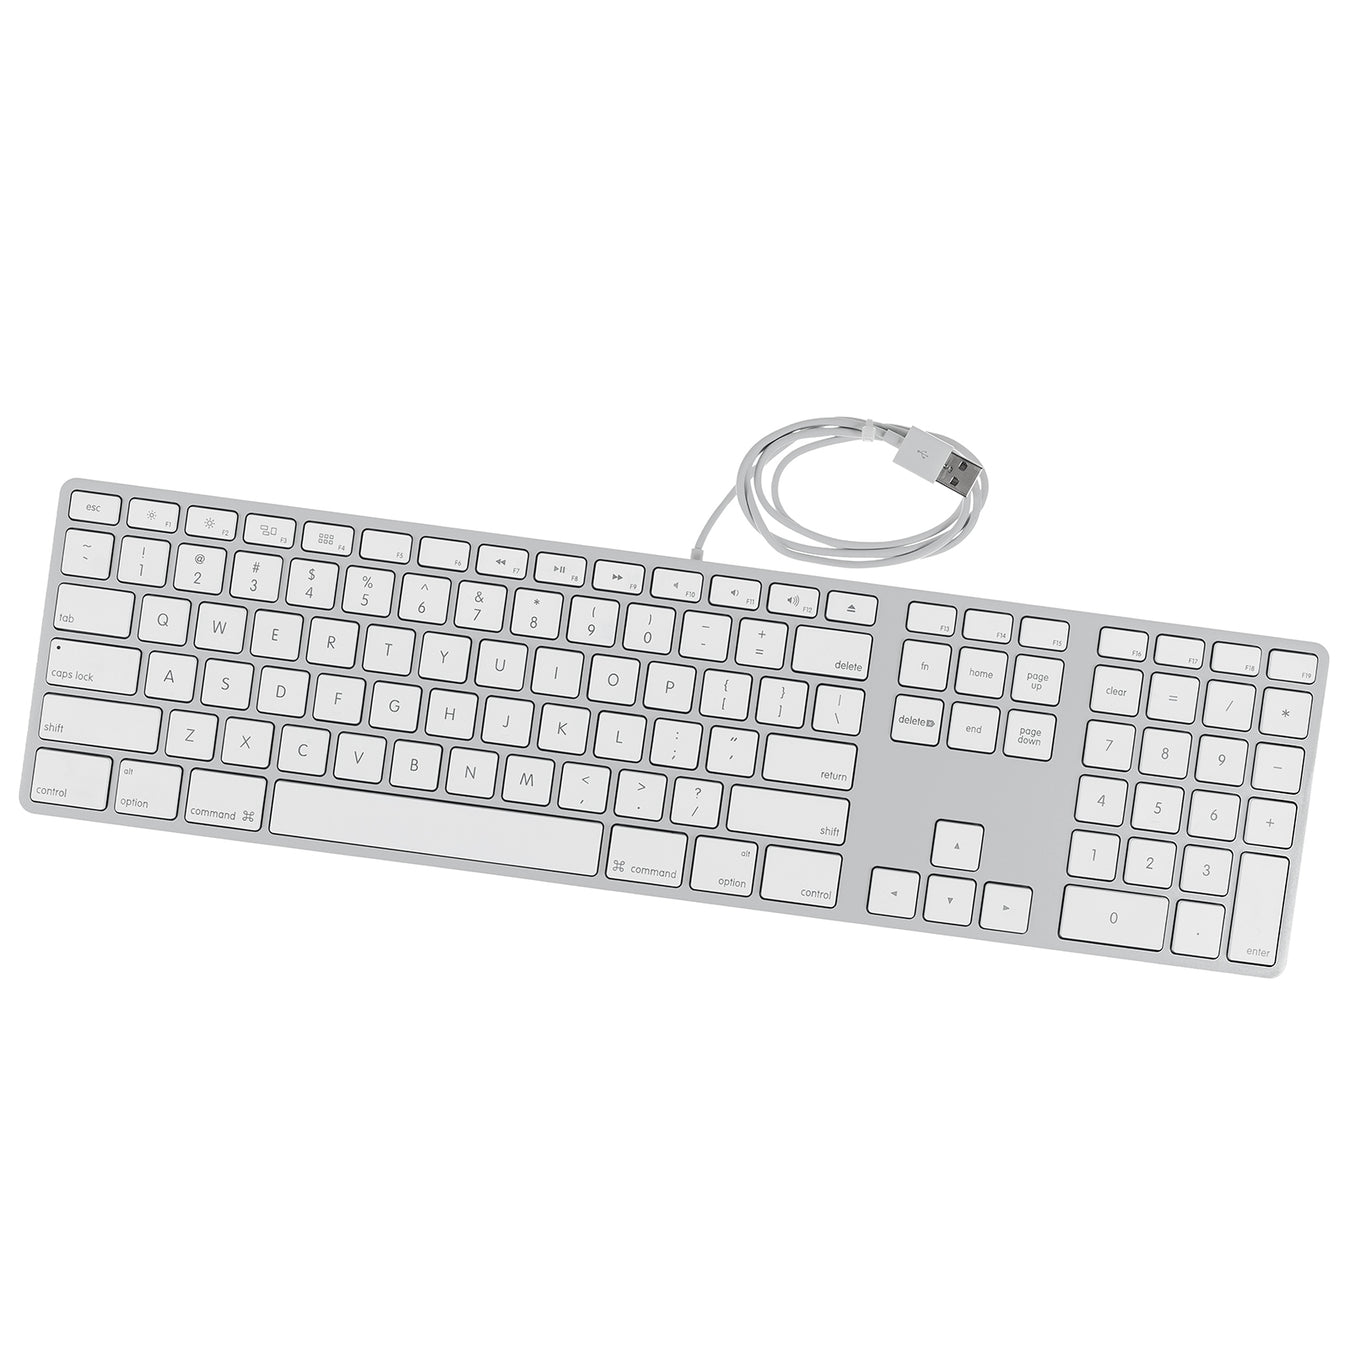 Genuine Wired Aluminum Keyboard for Mac - Silver